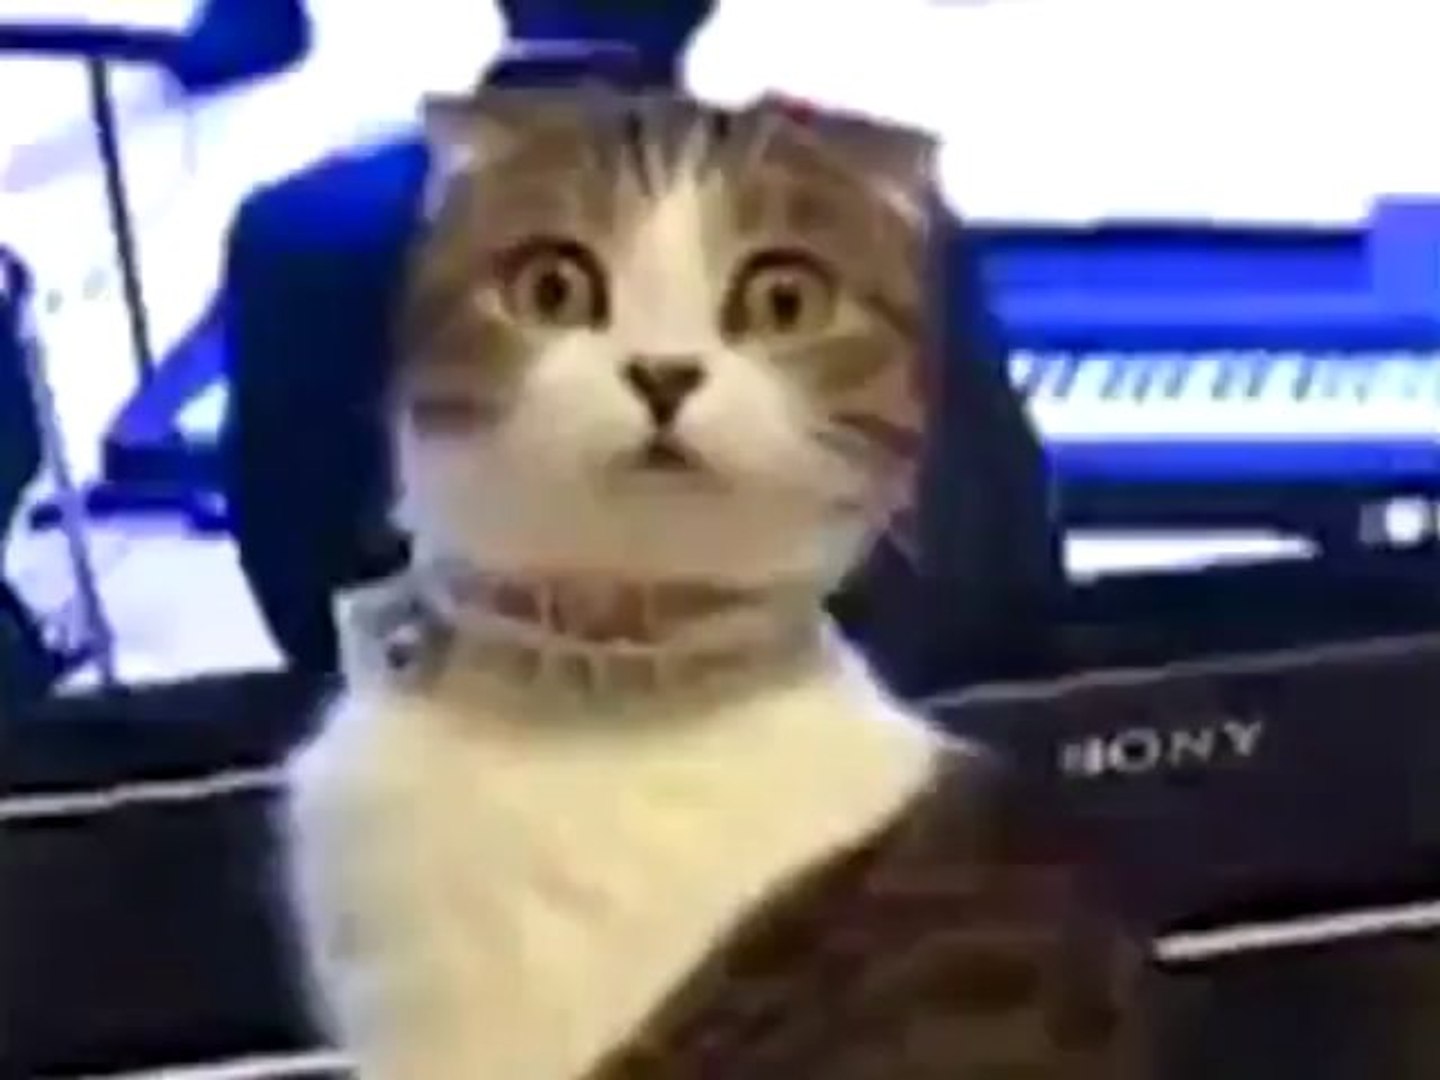 Funny Cats _Startled and Funny Cat